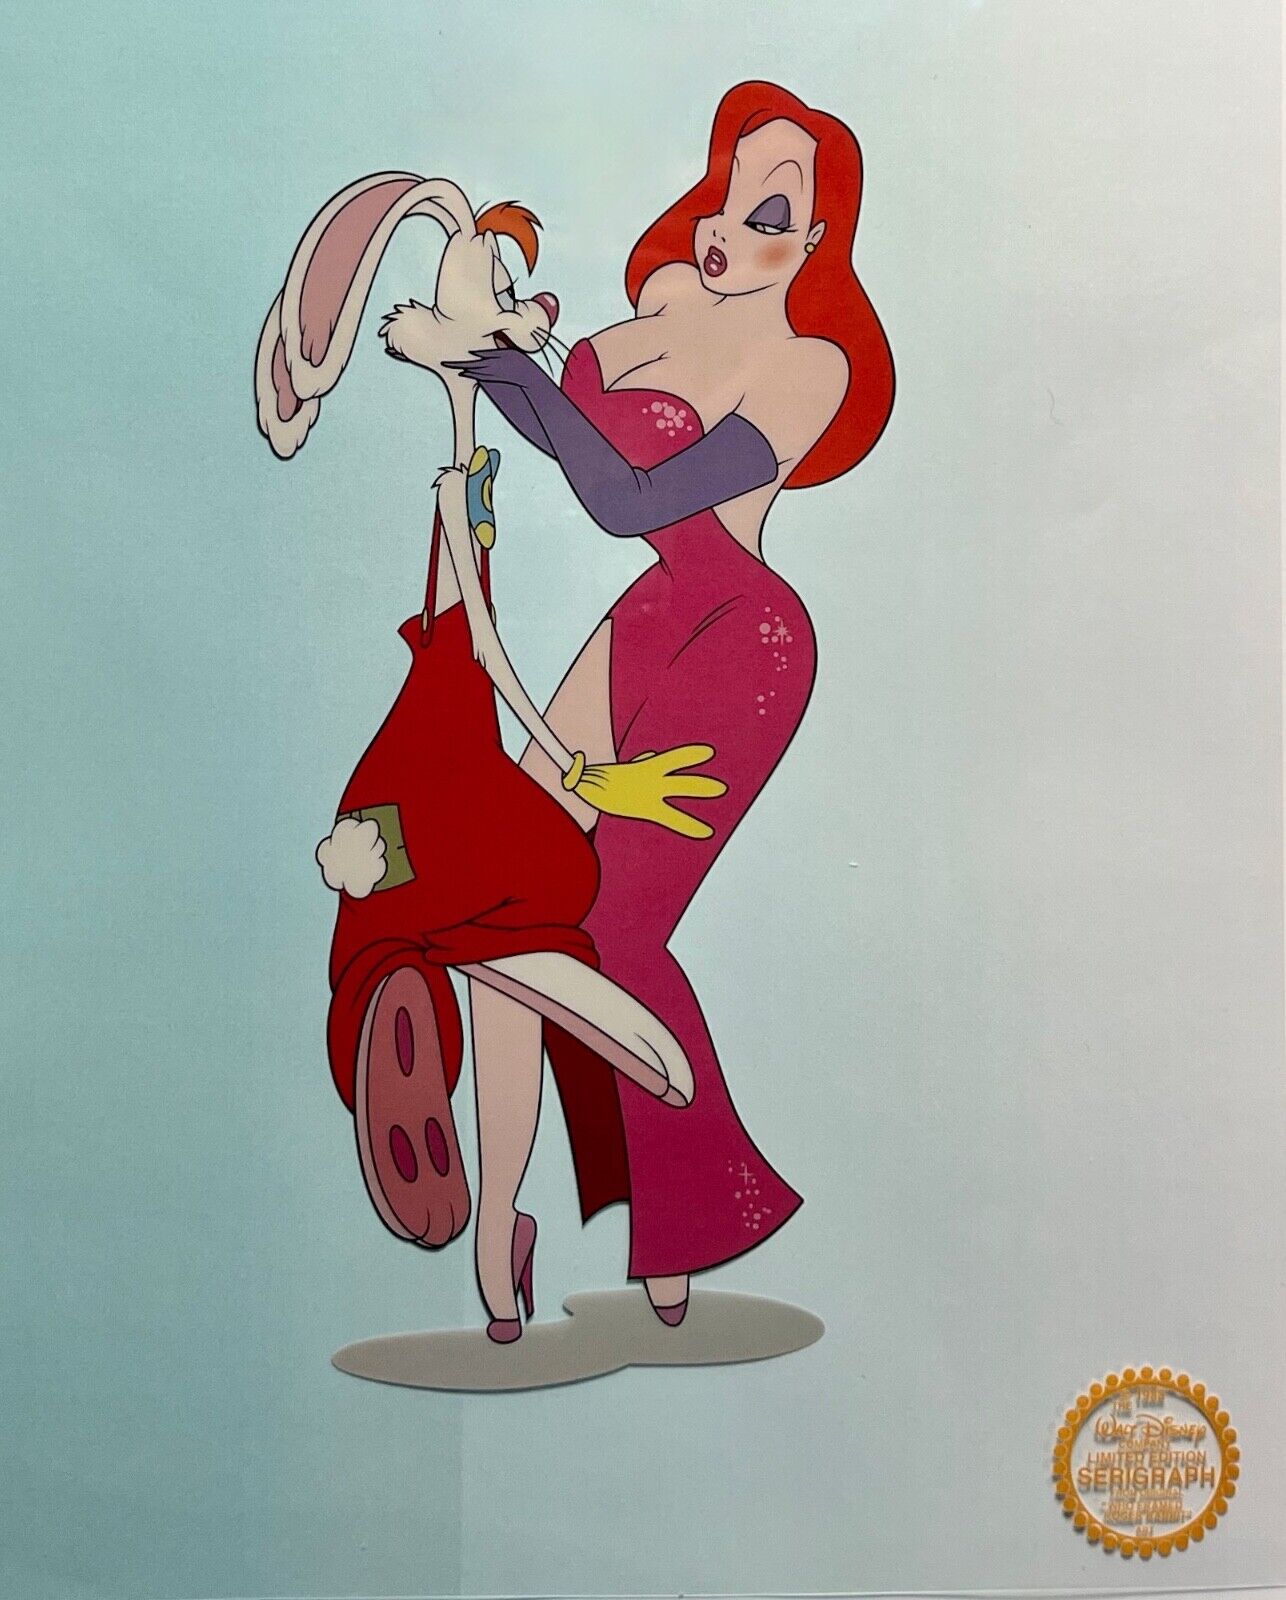 achmad ichsan add pictures of jessica rabbit and roger rabbit photo